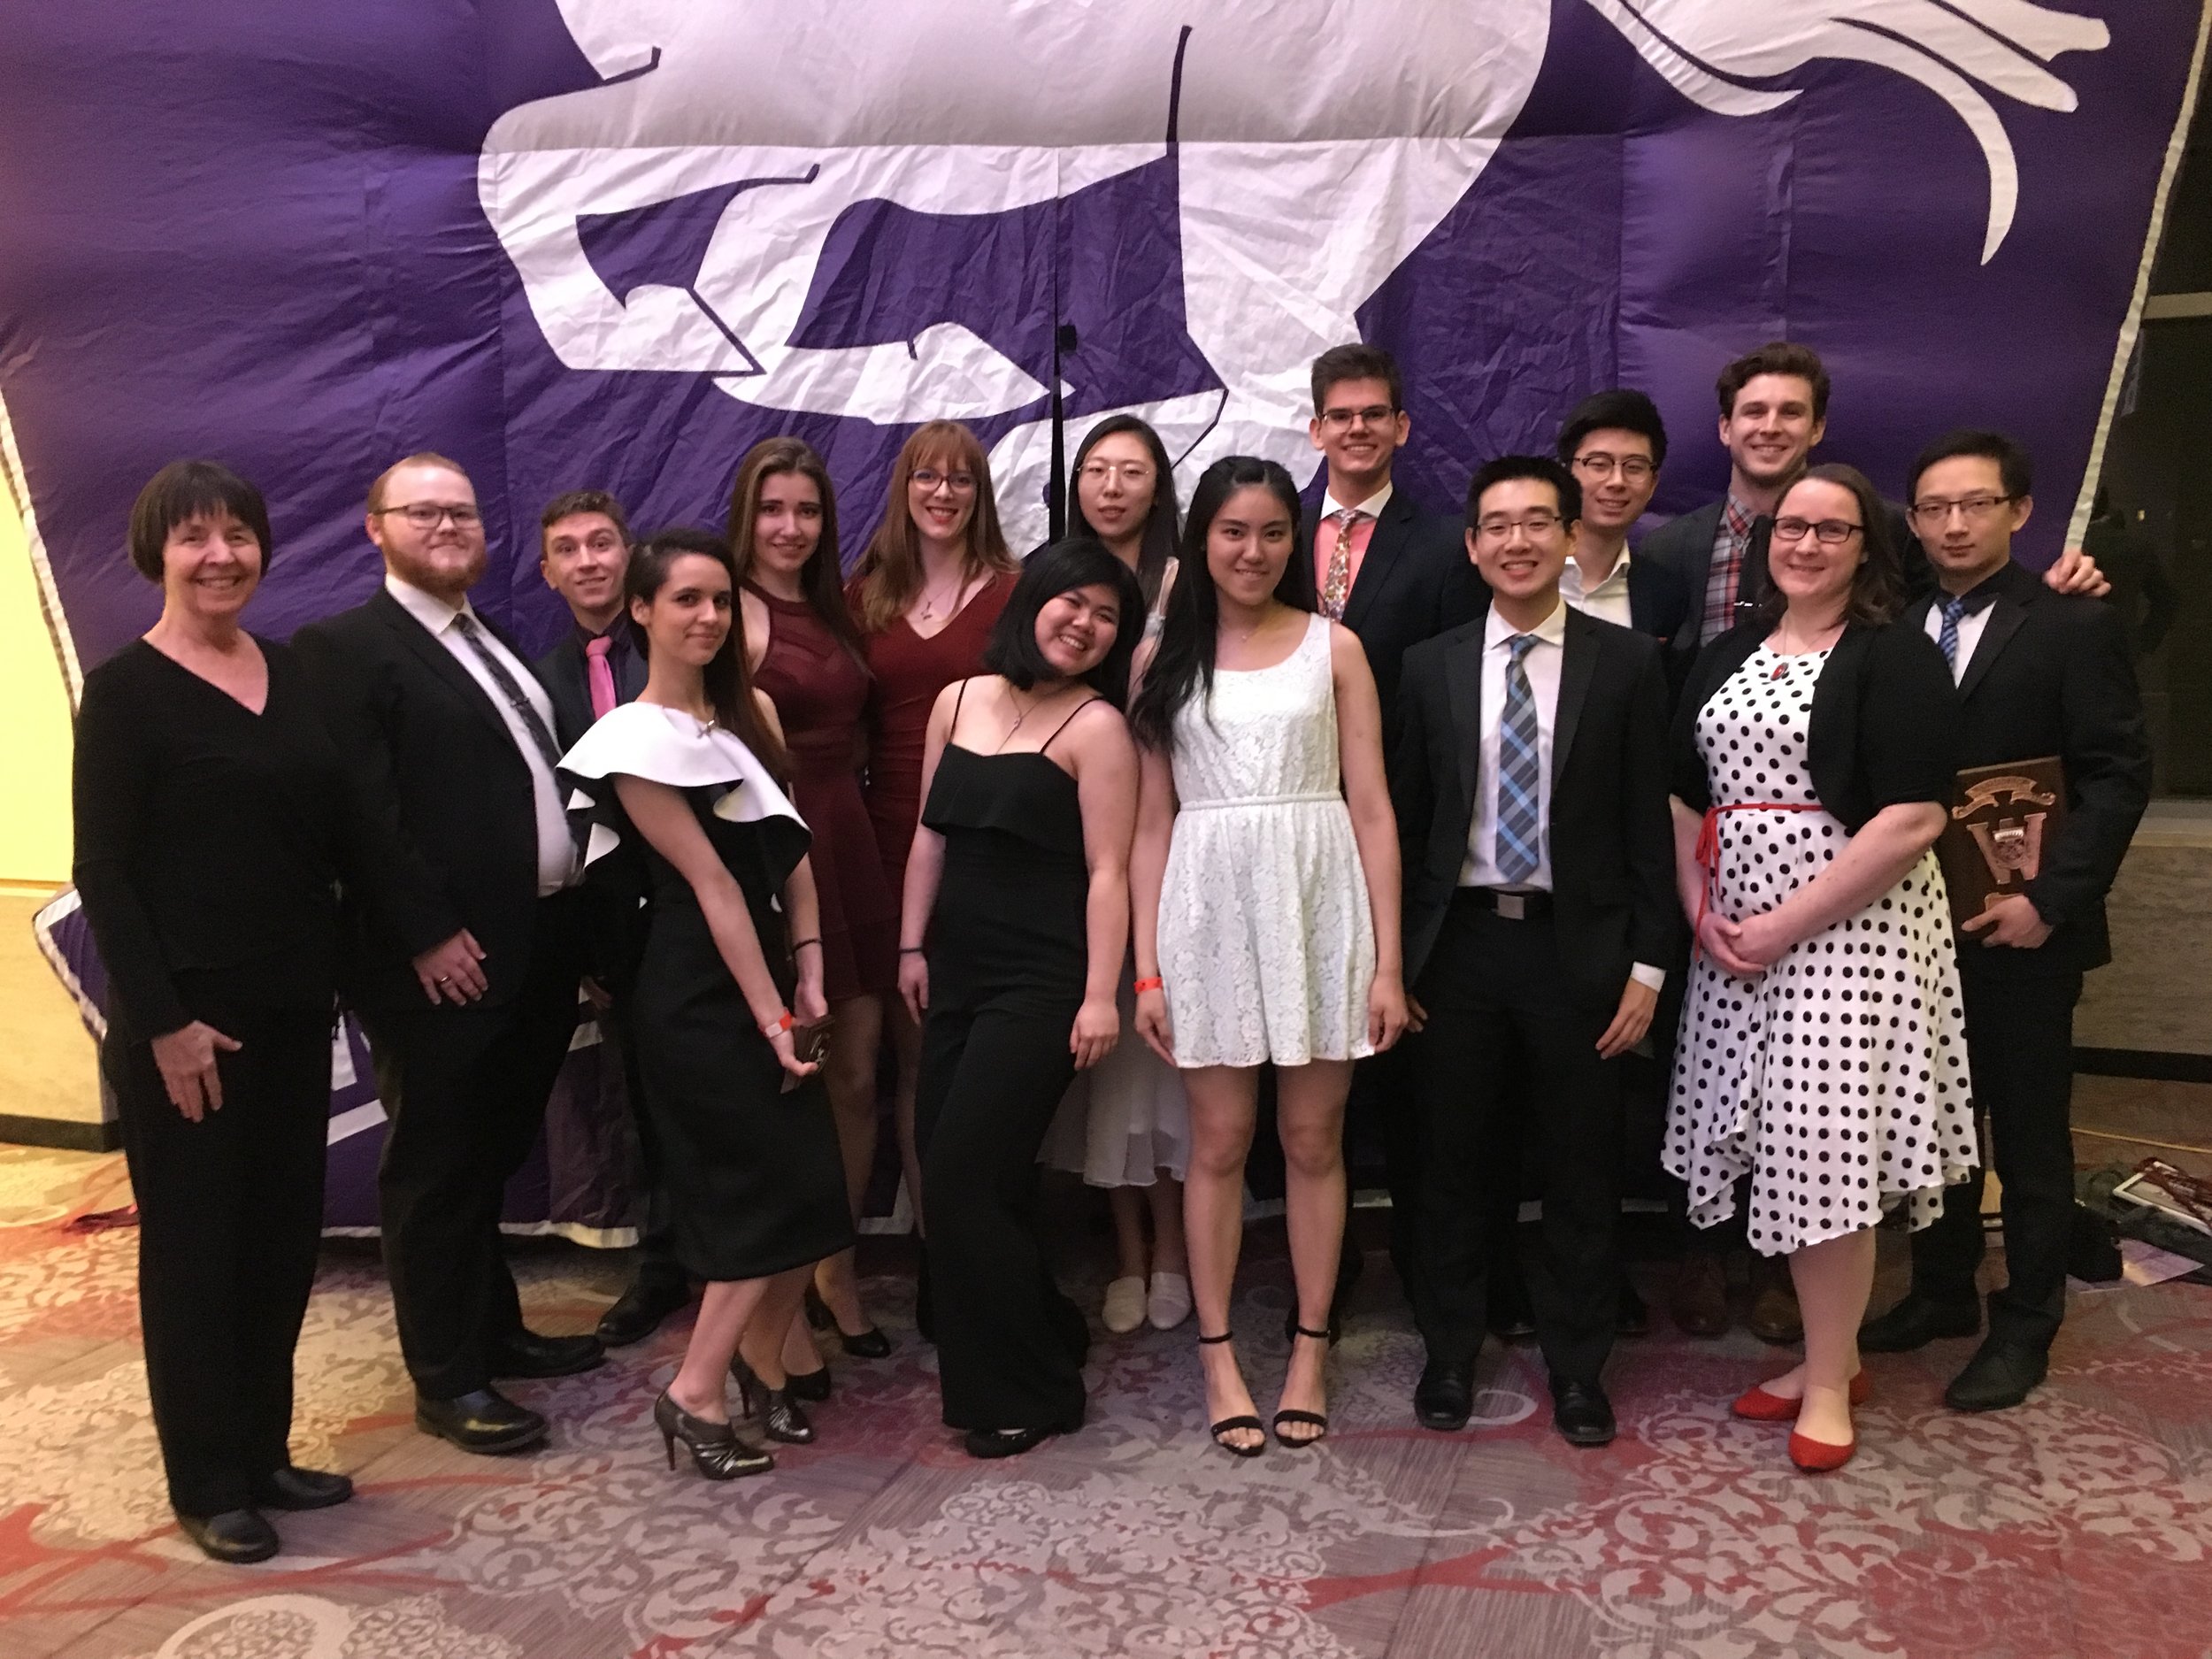 Athletic Banquet Group 2019.JPG